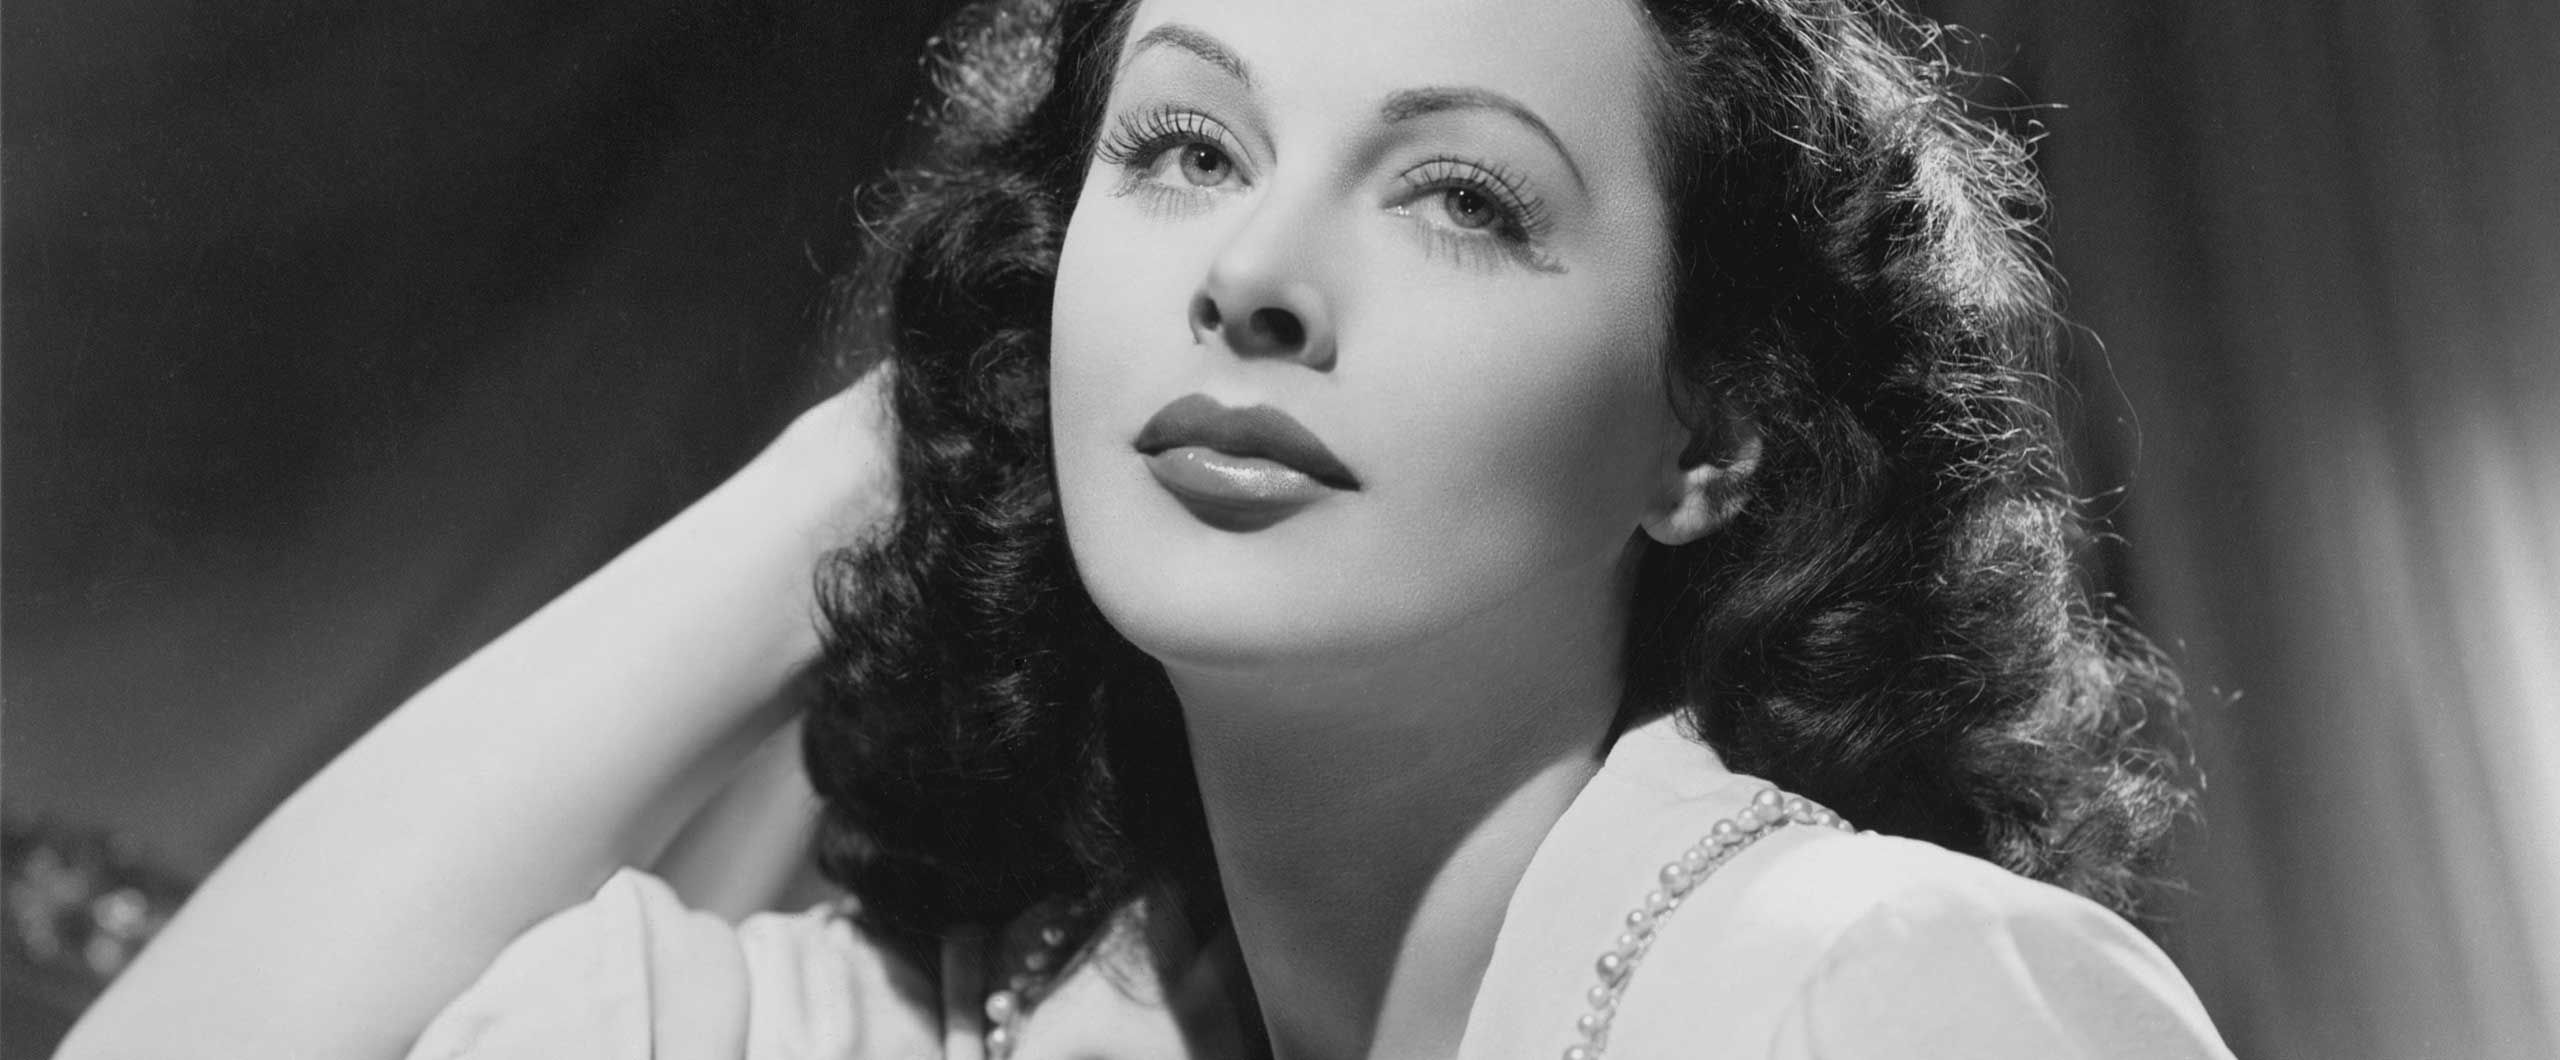 Actress Hedy Lamarr, the Real-life Jewish Wonder Woman Whose Inventions Led to WiFi and